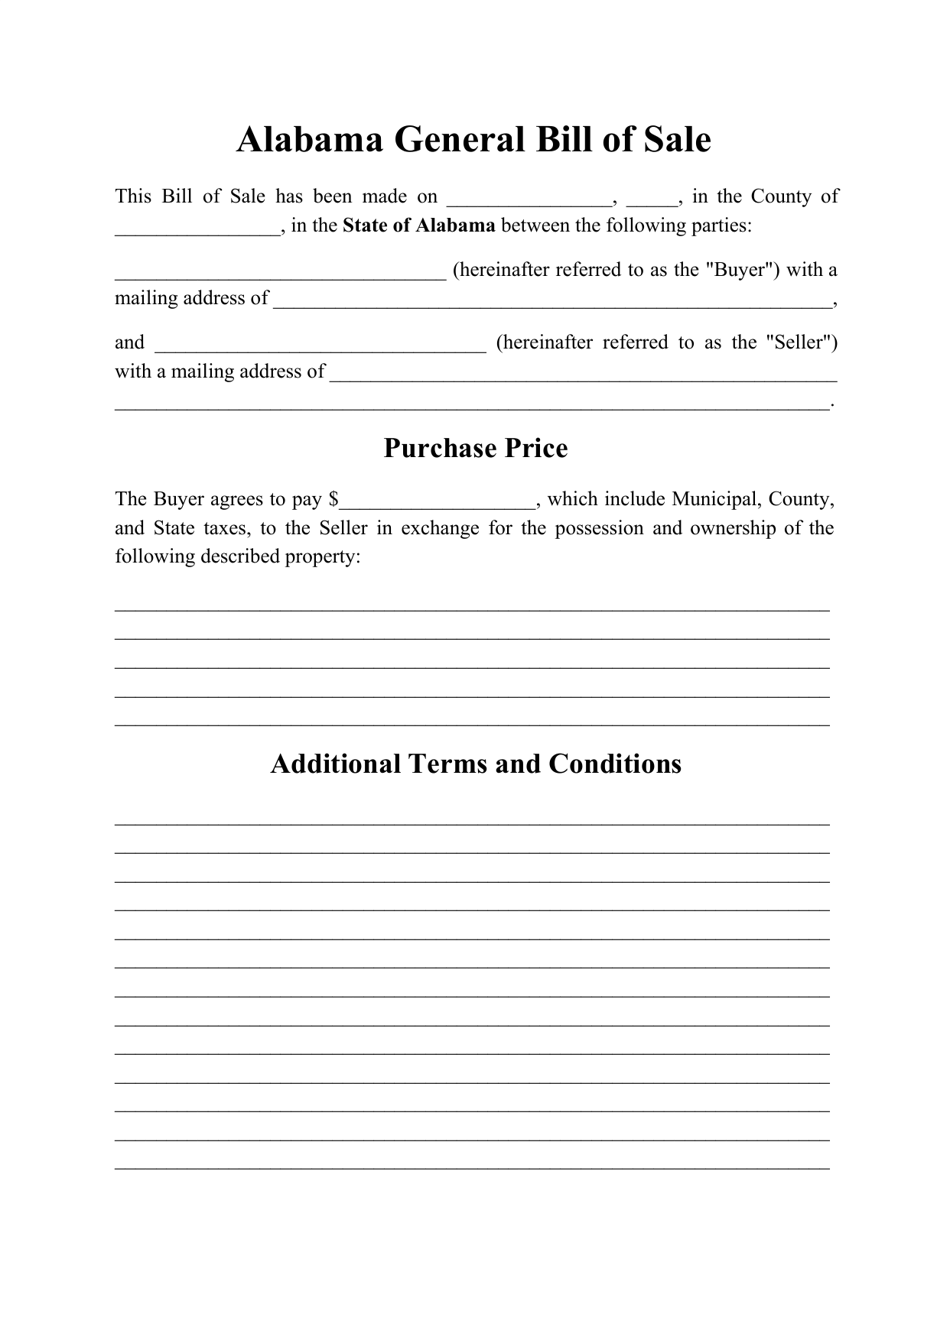 alabama-generic-bill-of-sale-form-fill-out-sign-online-and-download-pdf-templateroller